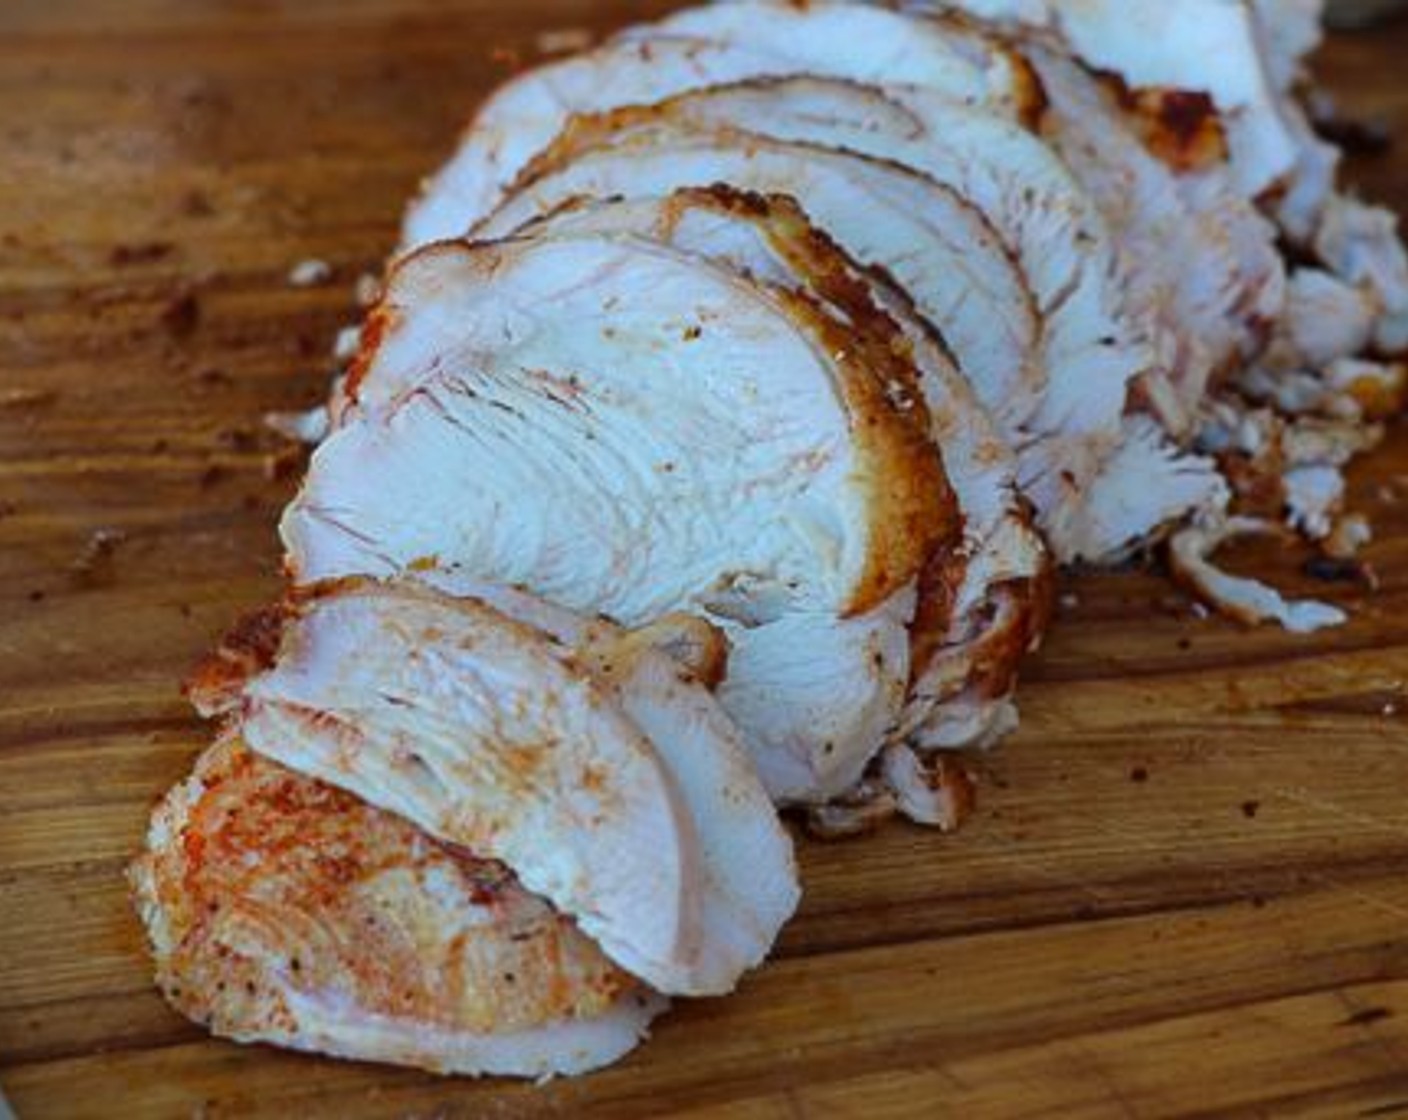 step 7 When the turkey breast reaches 165 degrees F (73 degrees C) remove it from the grill and rest for 15 minutes. Remove the netting from around the breast and cut into thin slices.